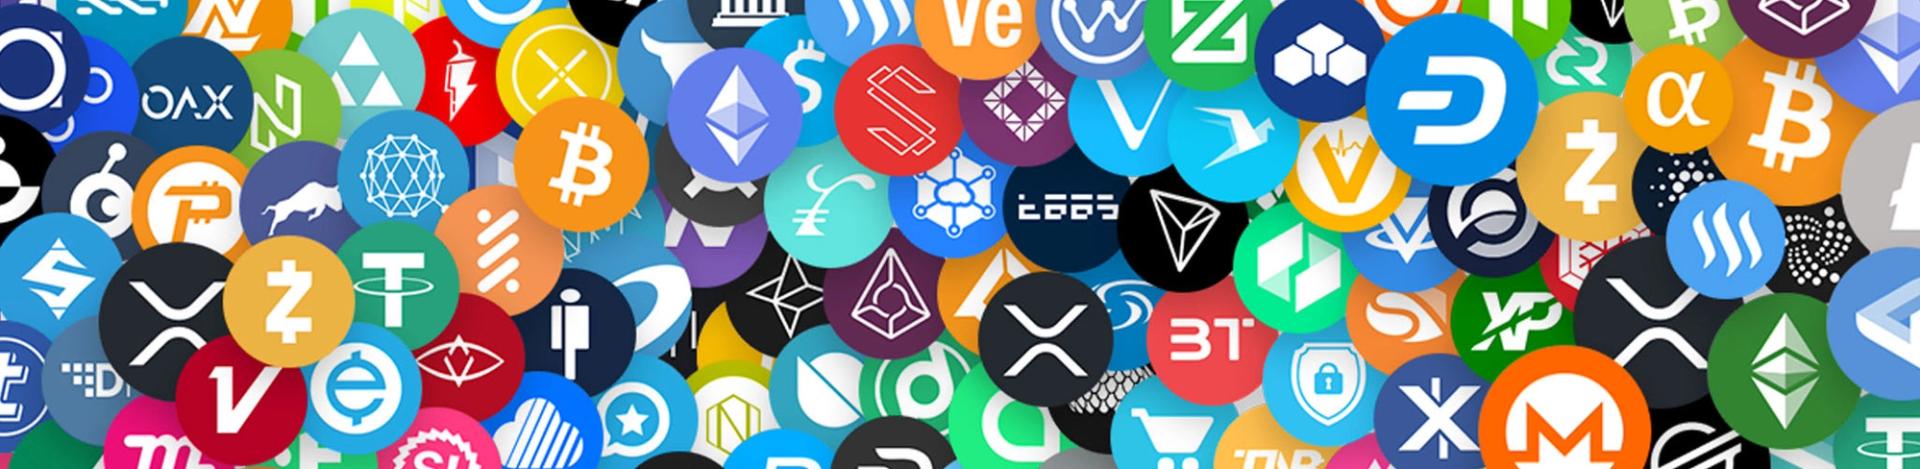 Lots of overlapping cryptocurrency tokens including Bitcoin, Ethereum, Dogecoin, Tether, Monero and XRP.